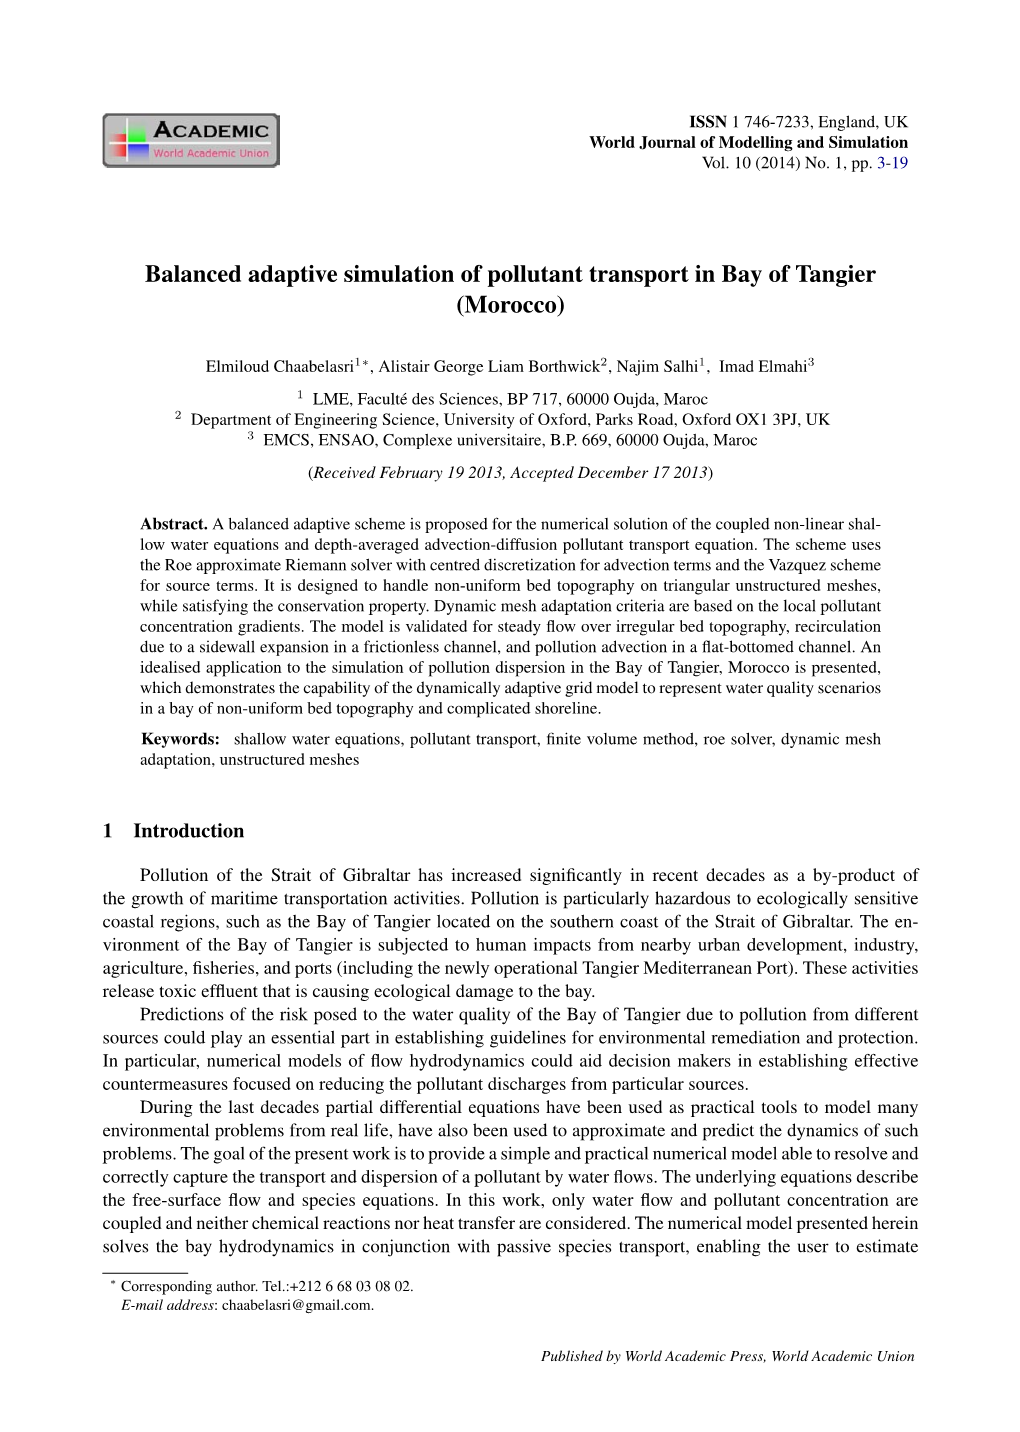 Balanced Adaptive Simulation of Pollutant Transport in Bay of Tangier (Morocco)